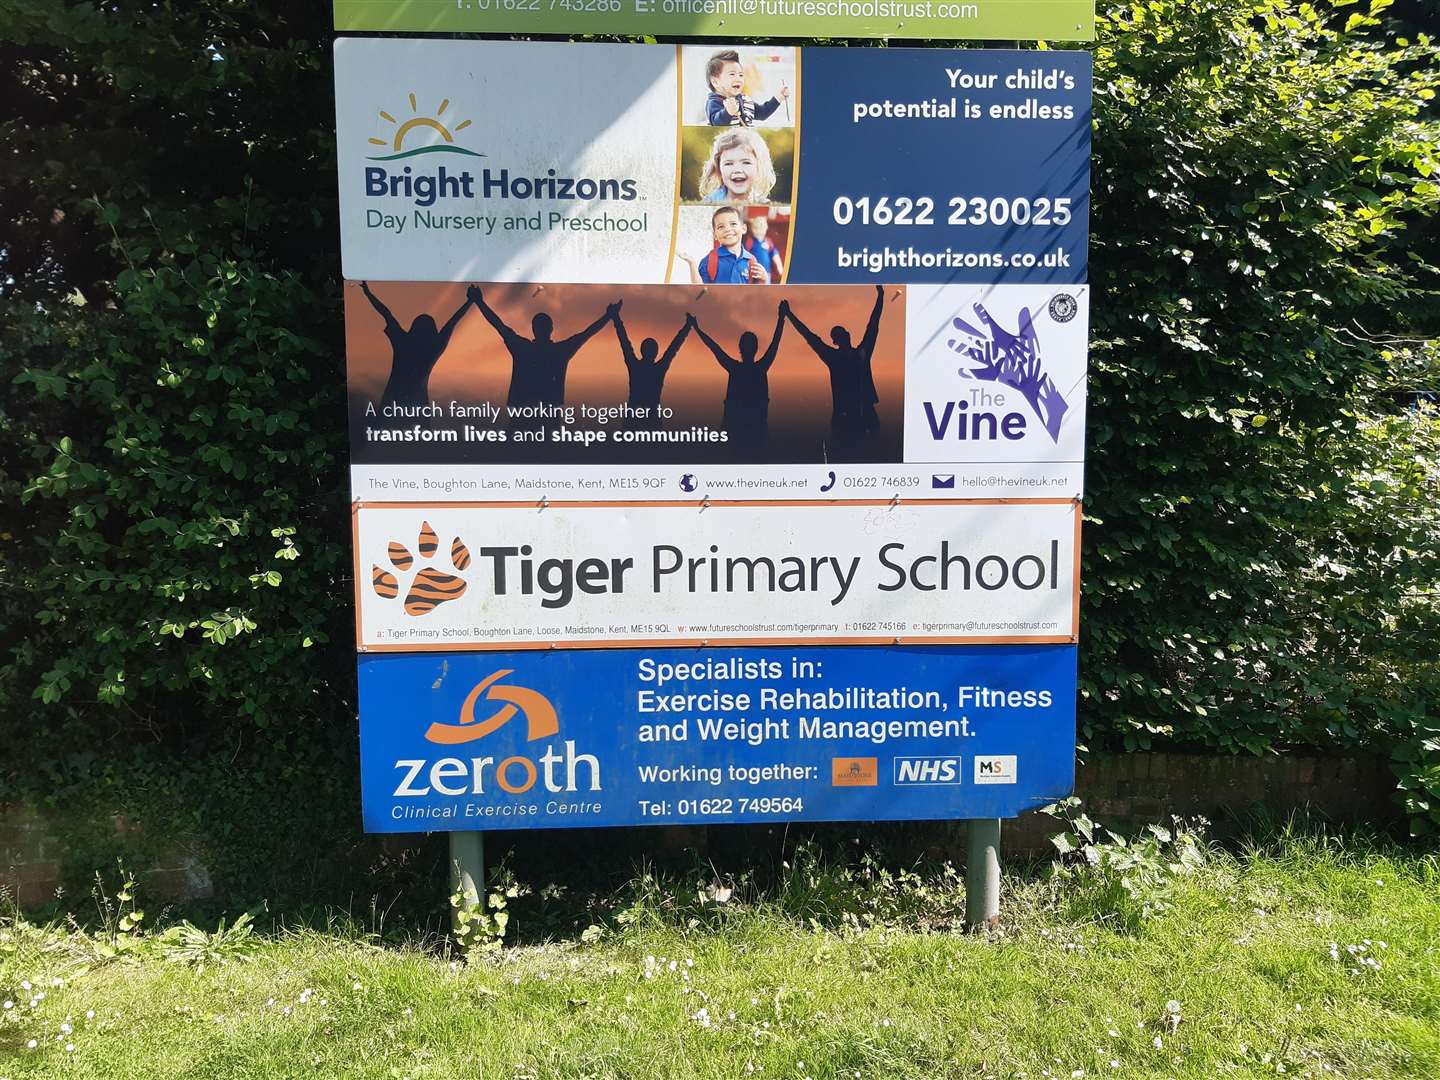 Tiger Primary School is on an educational campus off Boughton Lane